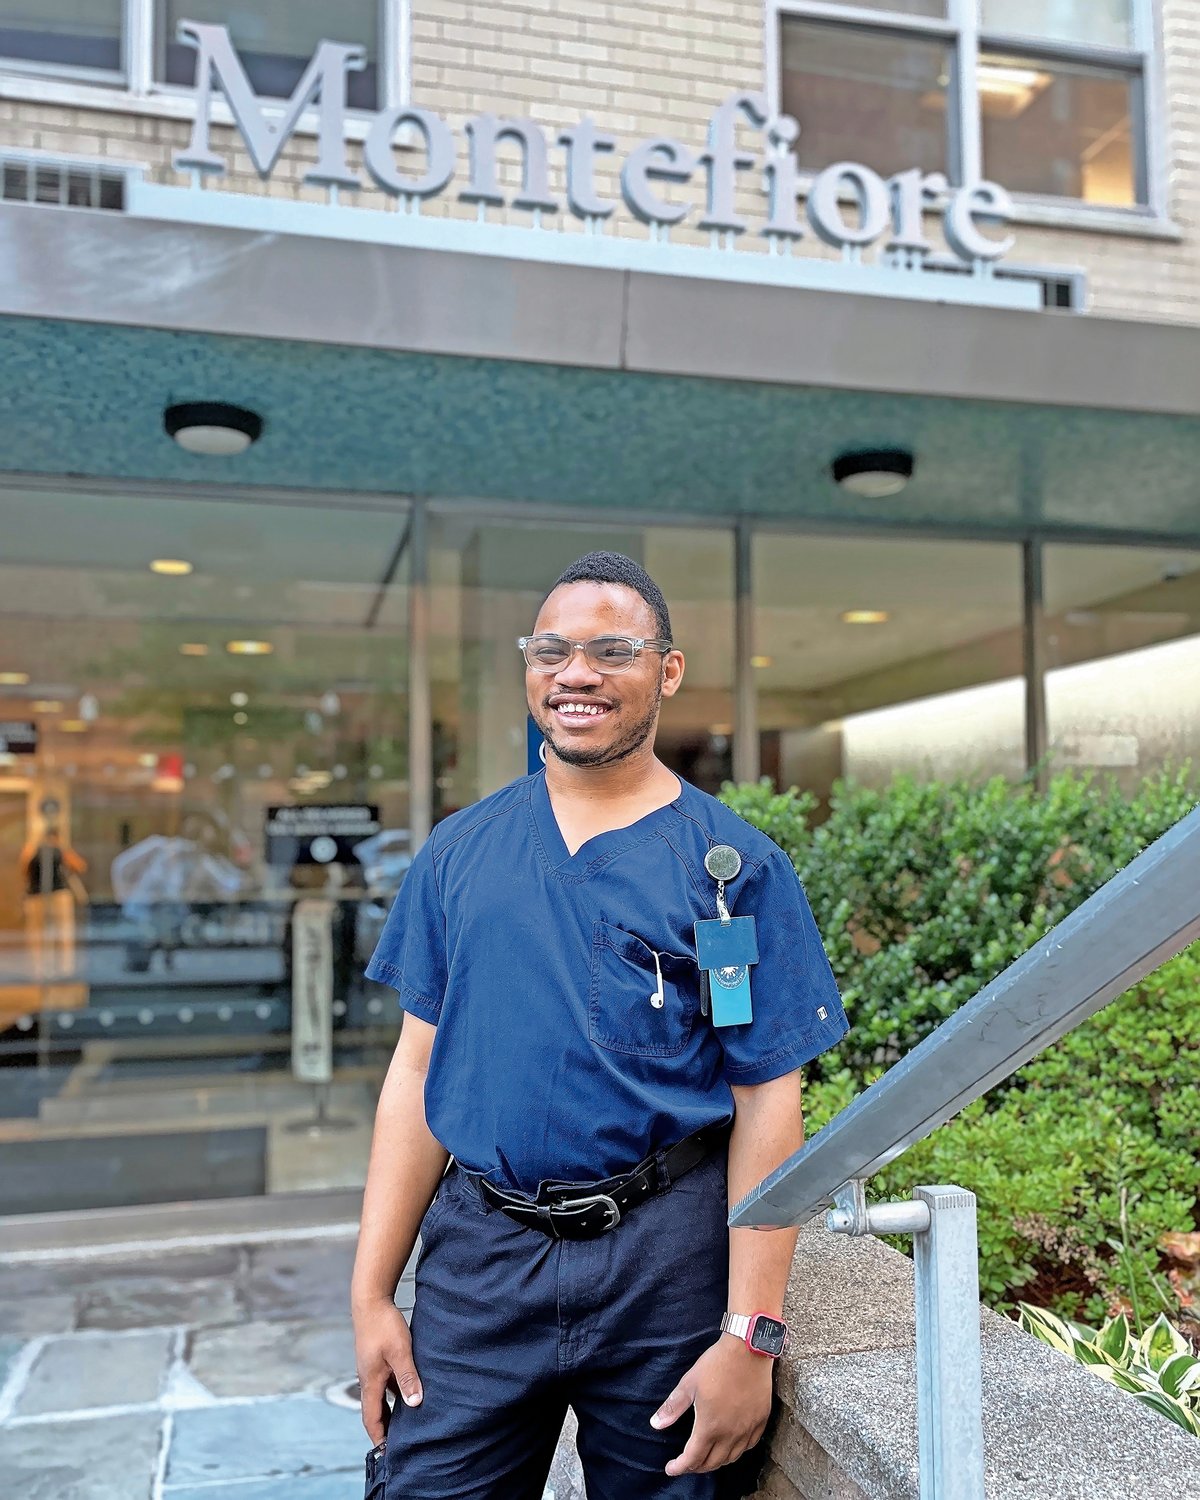 Renard Perkins, an alumnus of Project Search at Montefiore Medical Center, found a job through the program.